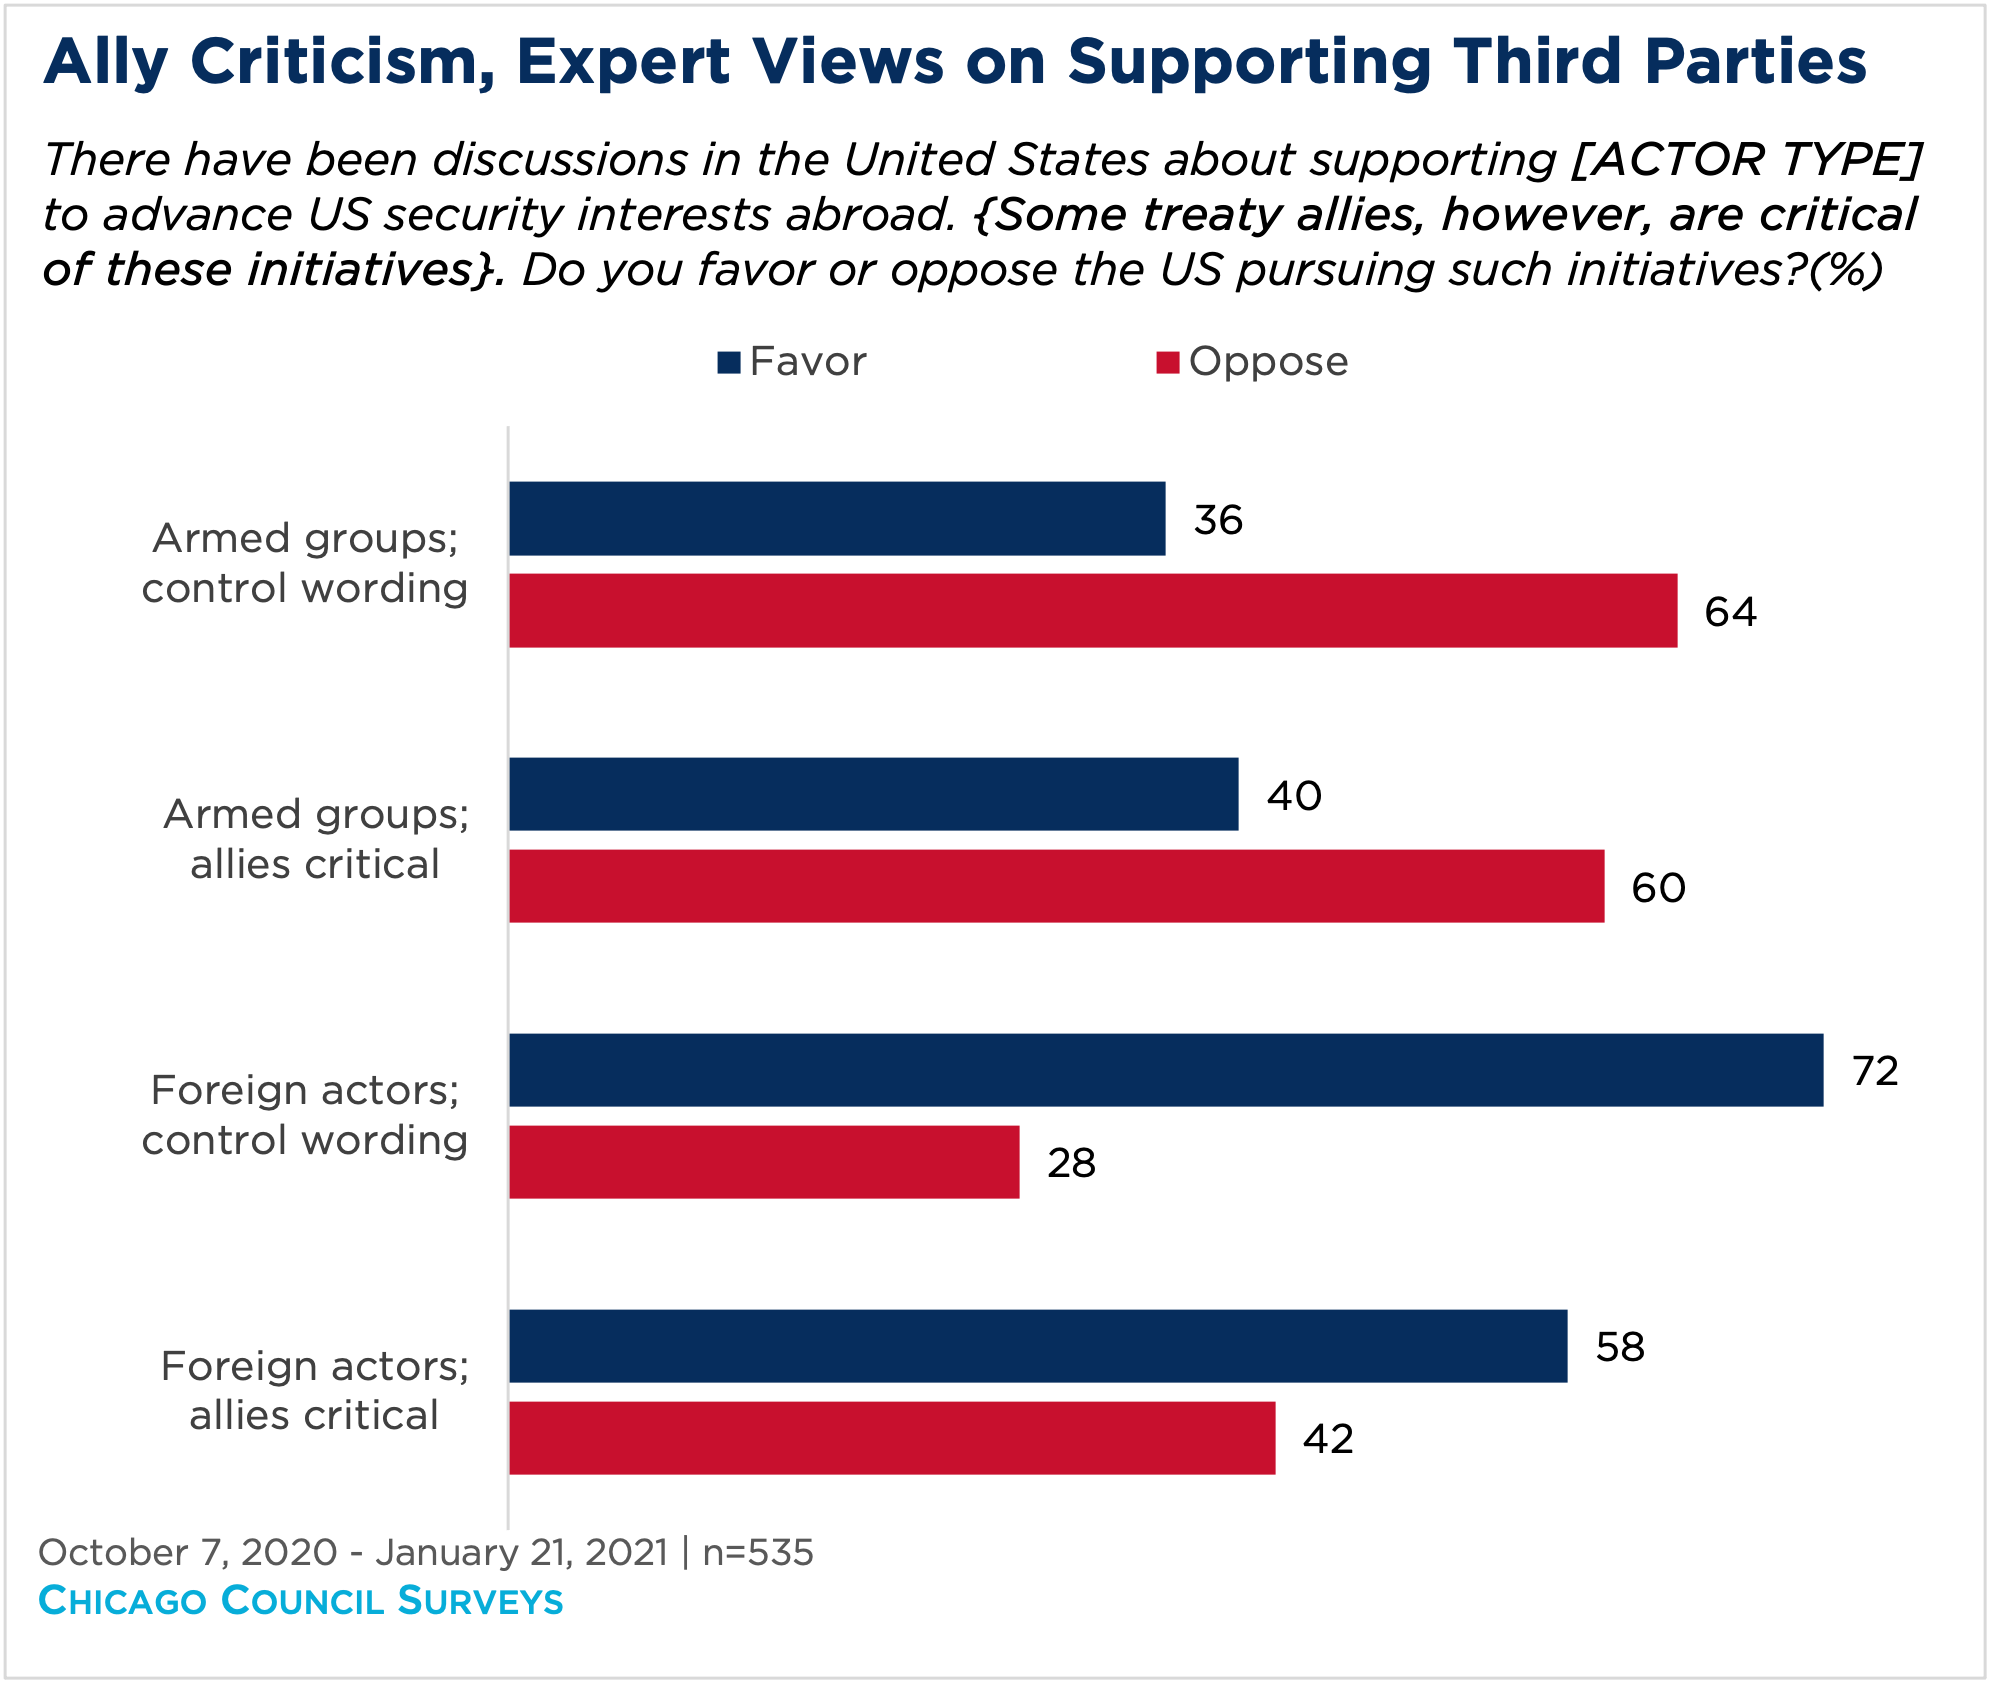 Bar graph showing expert views on supporting third parties